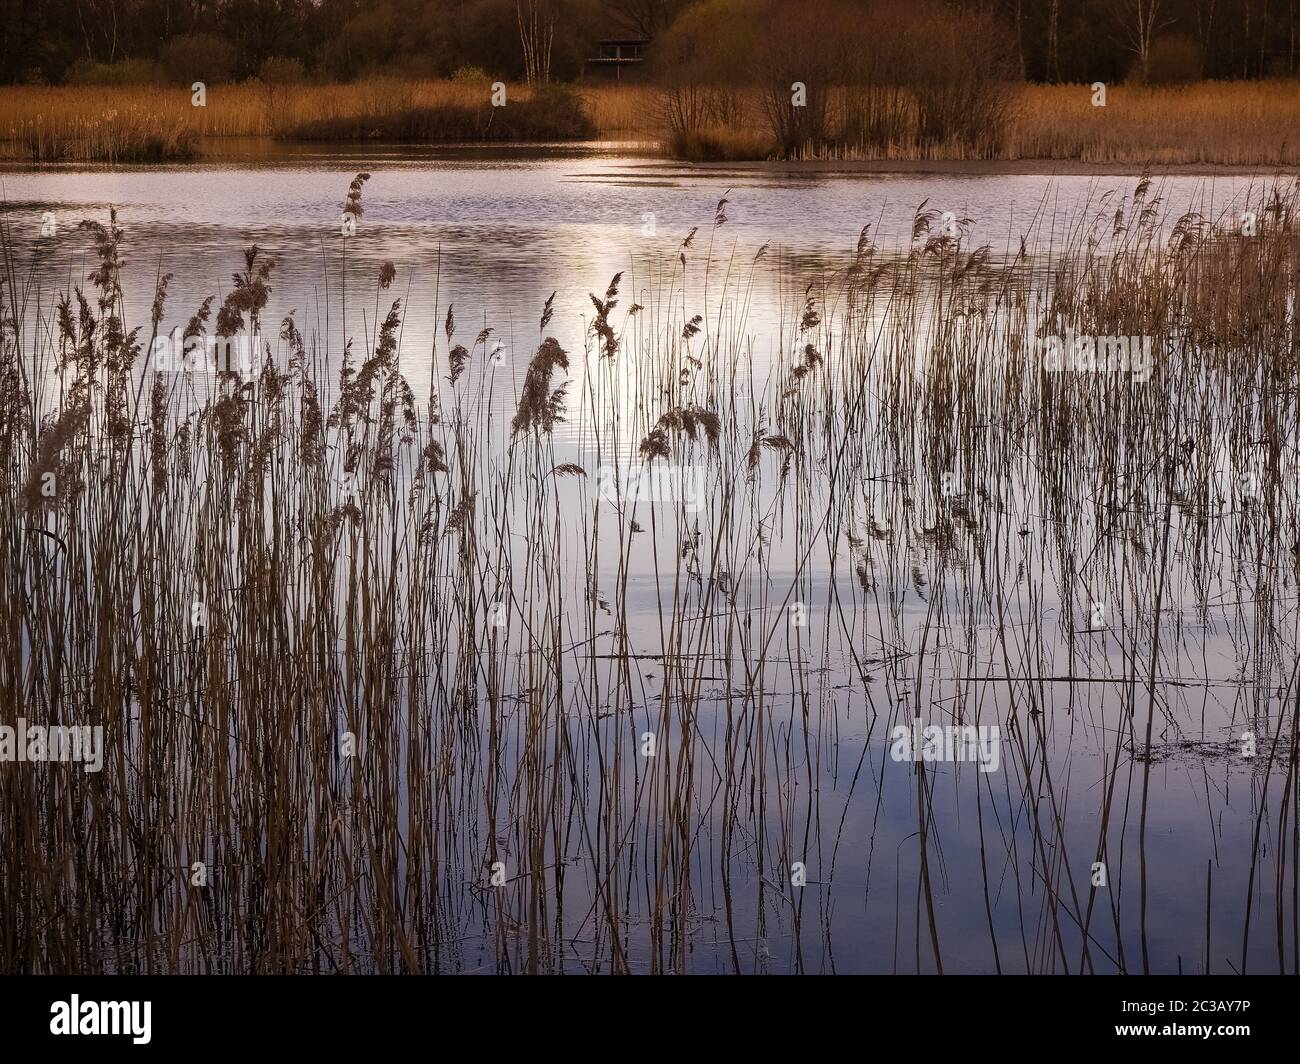 Reeds and lake in golden afternoon sunlight at Potteric Carr Nature Reserve, South Yorkshire, England Stock Photo